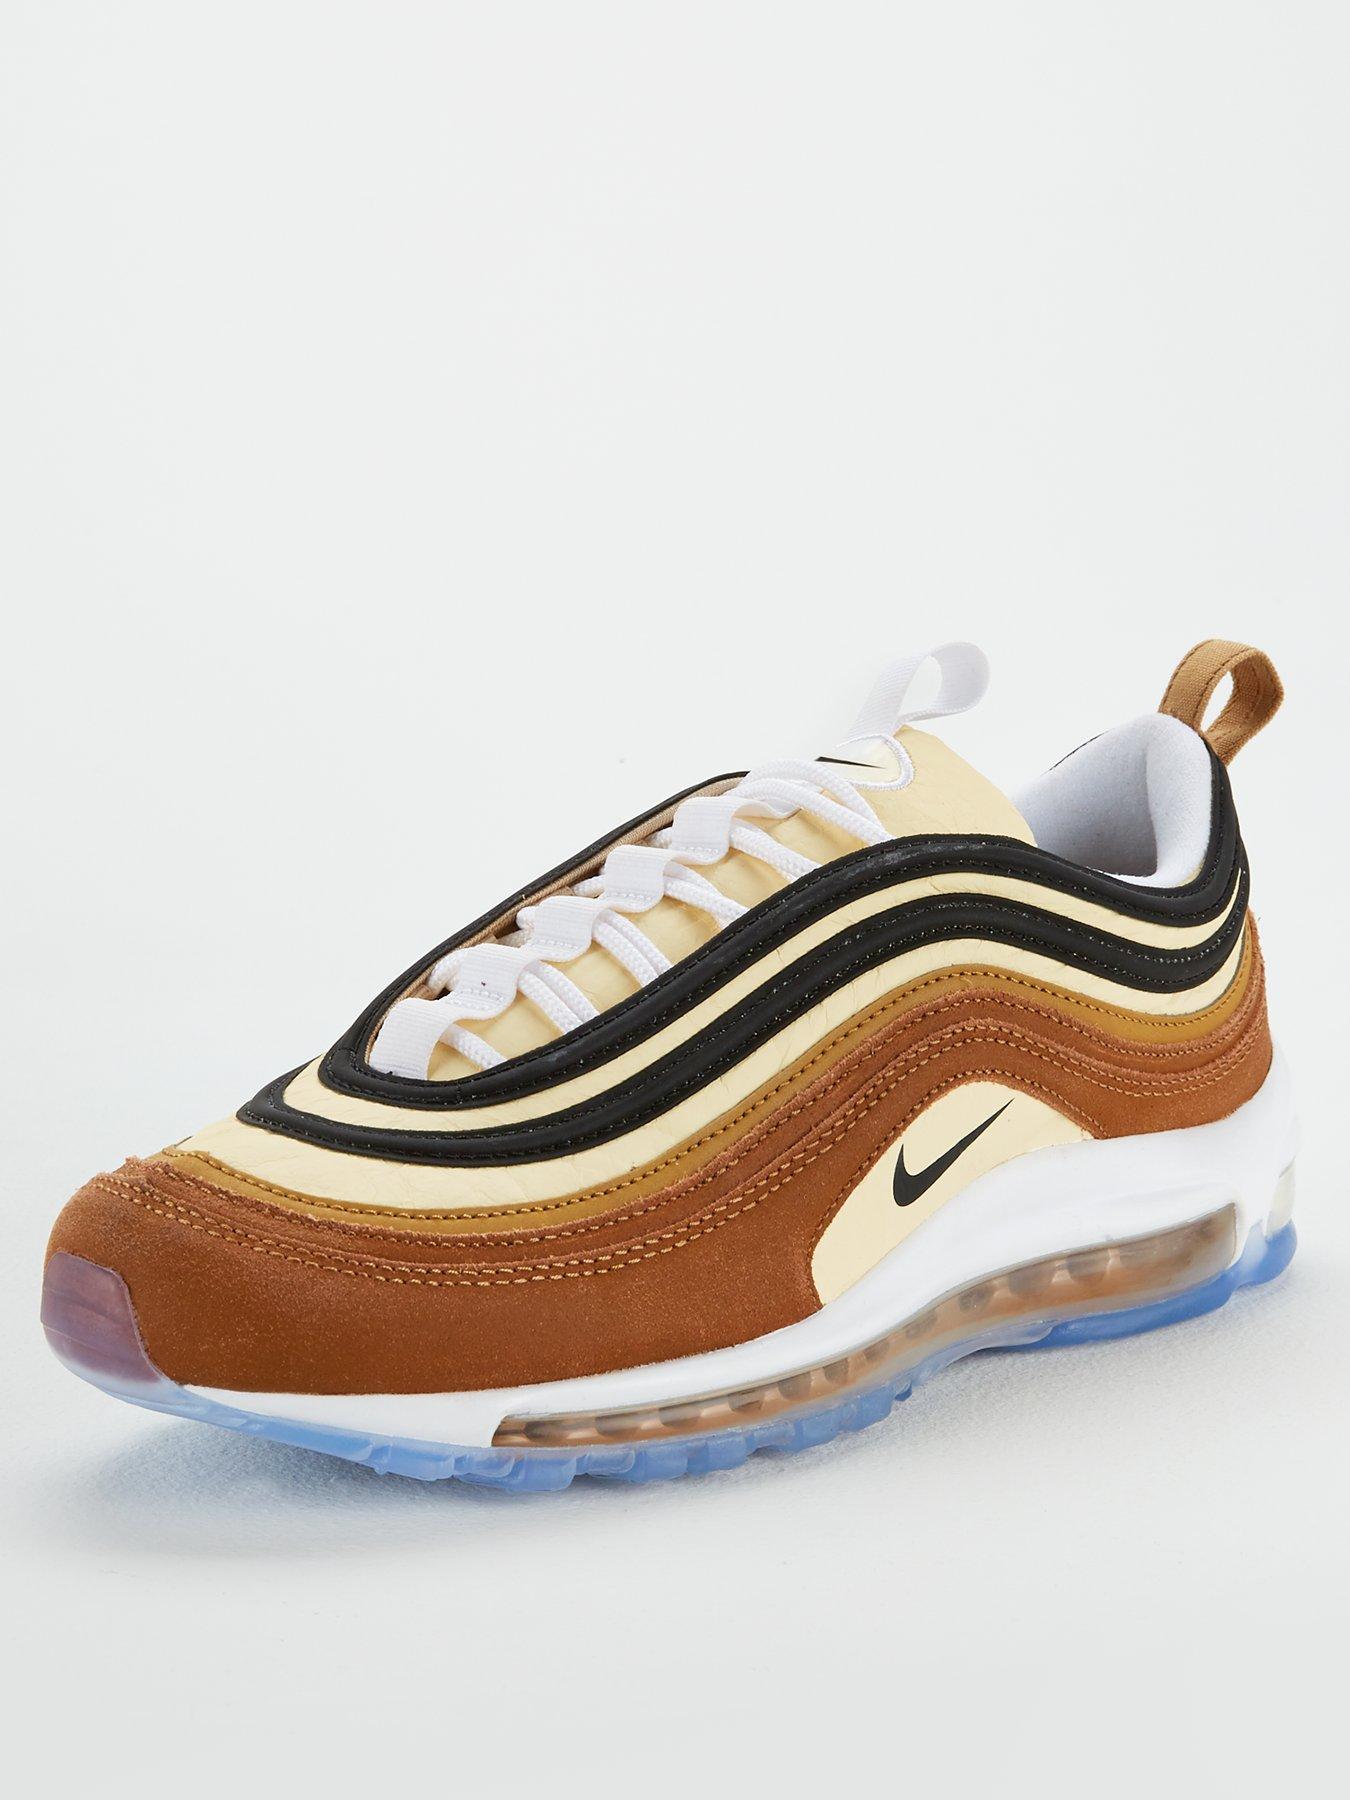 Nike Air Vapormax 97 Metallic Gold AVAILABLE NOW The